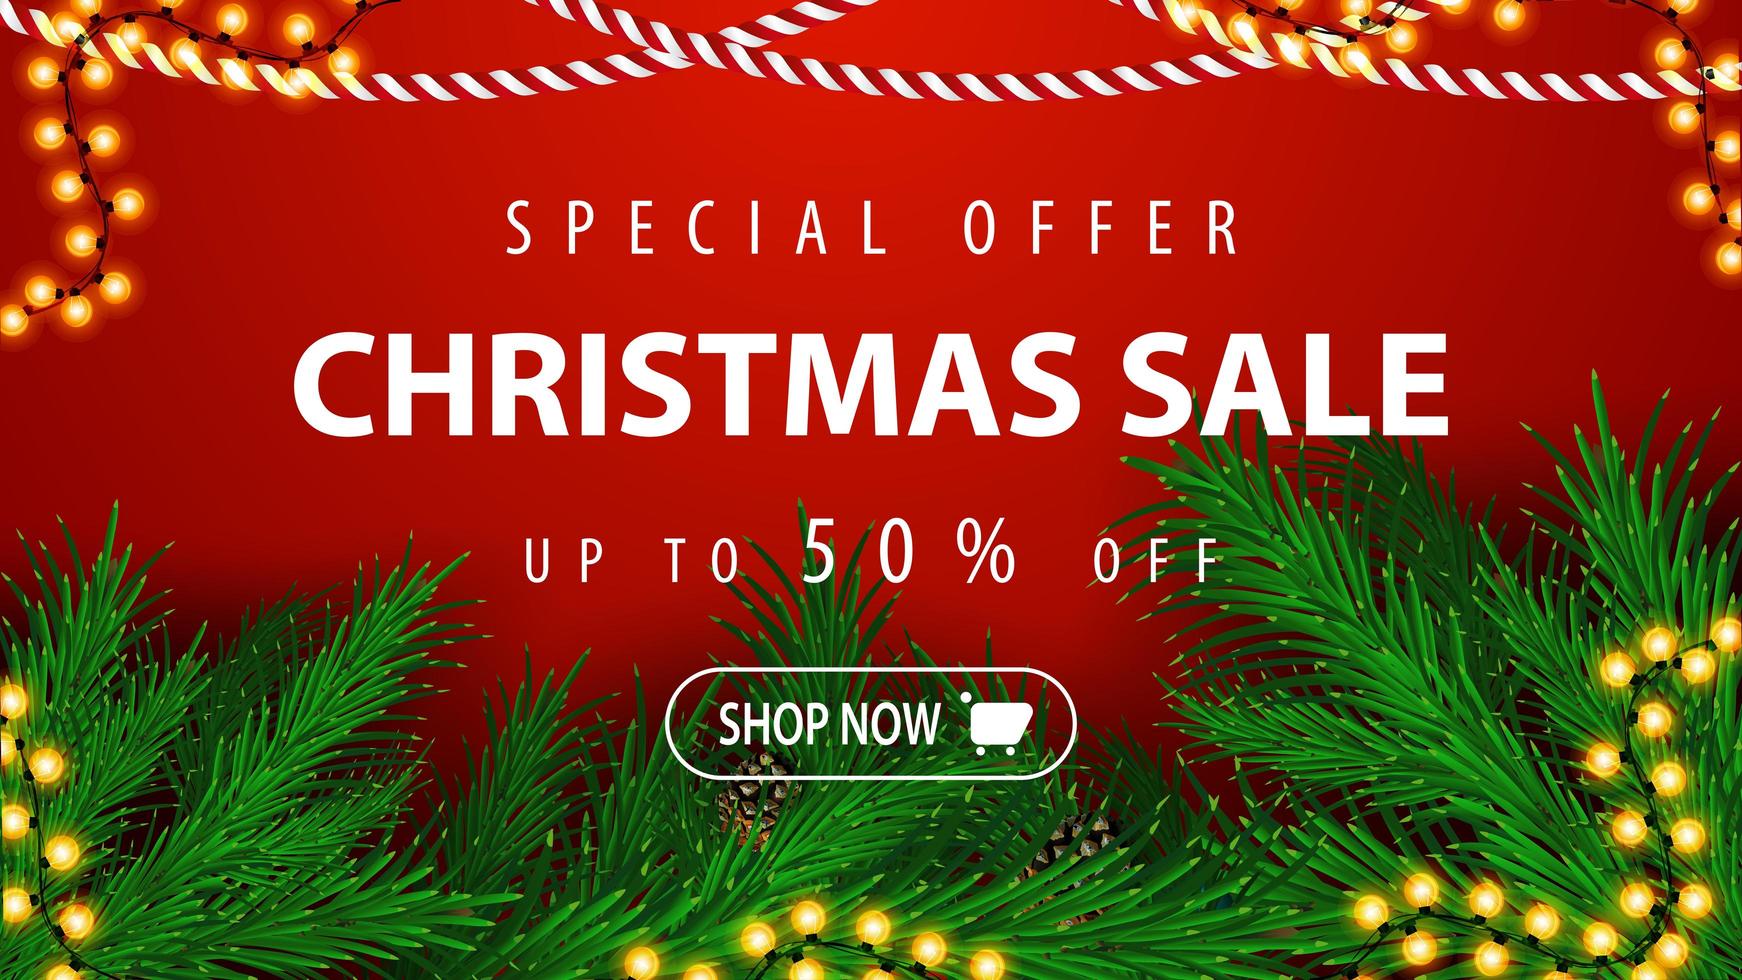 Special offer, Christmas sale, up to 50 off, beautiful red discount banner with Christmas tree branches and garlands vector